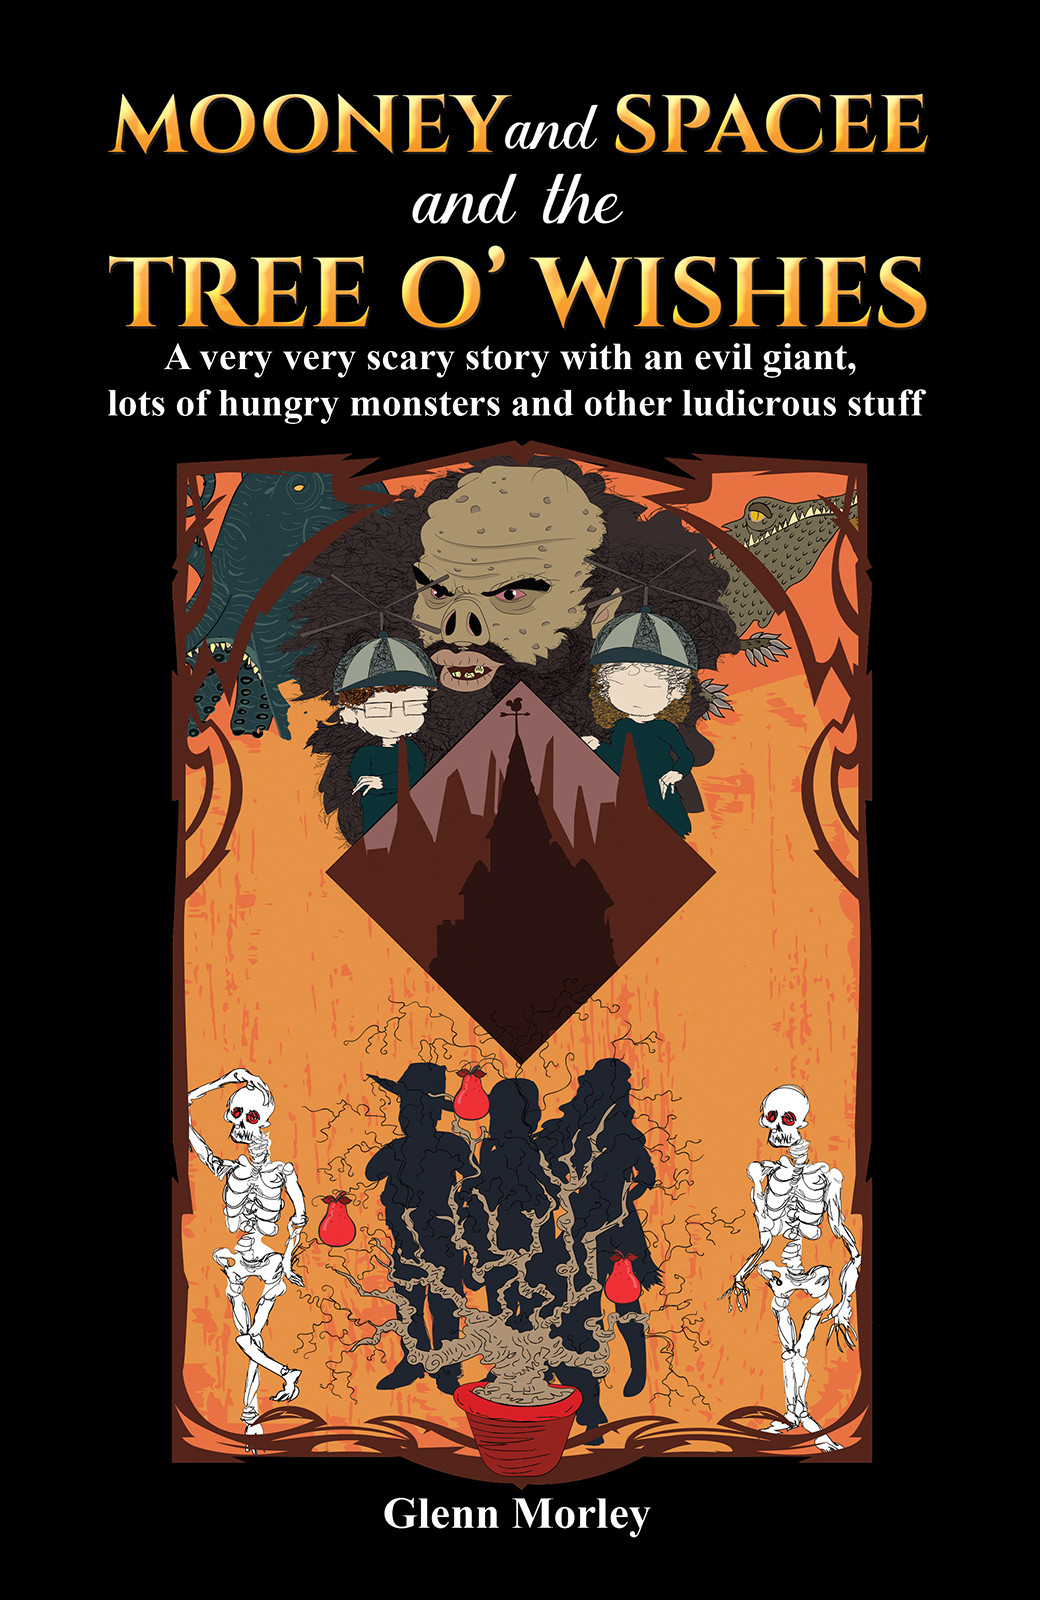 Mooney and Spacee and the Tree o' Wishes-bookcover